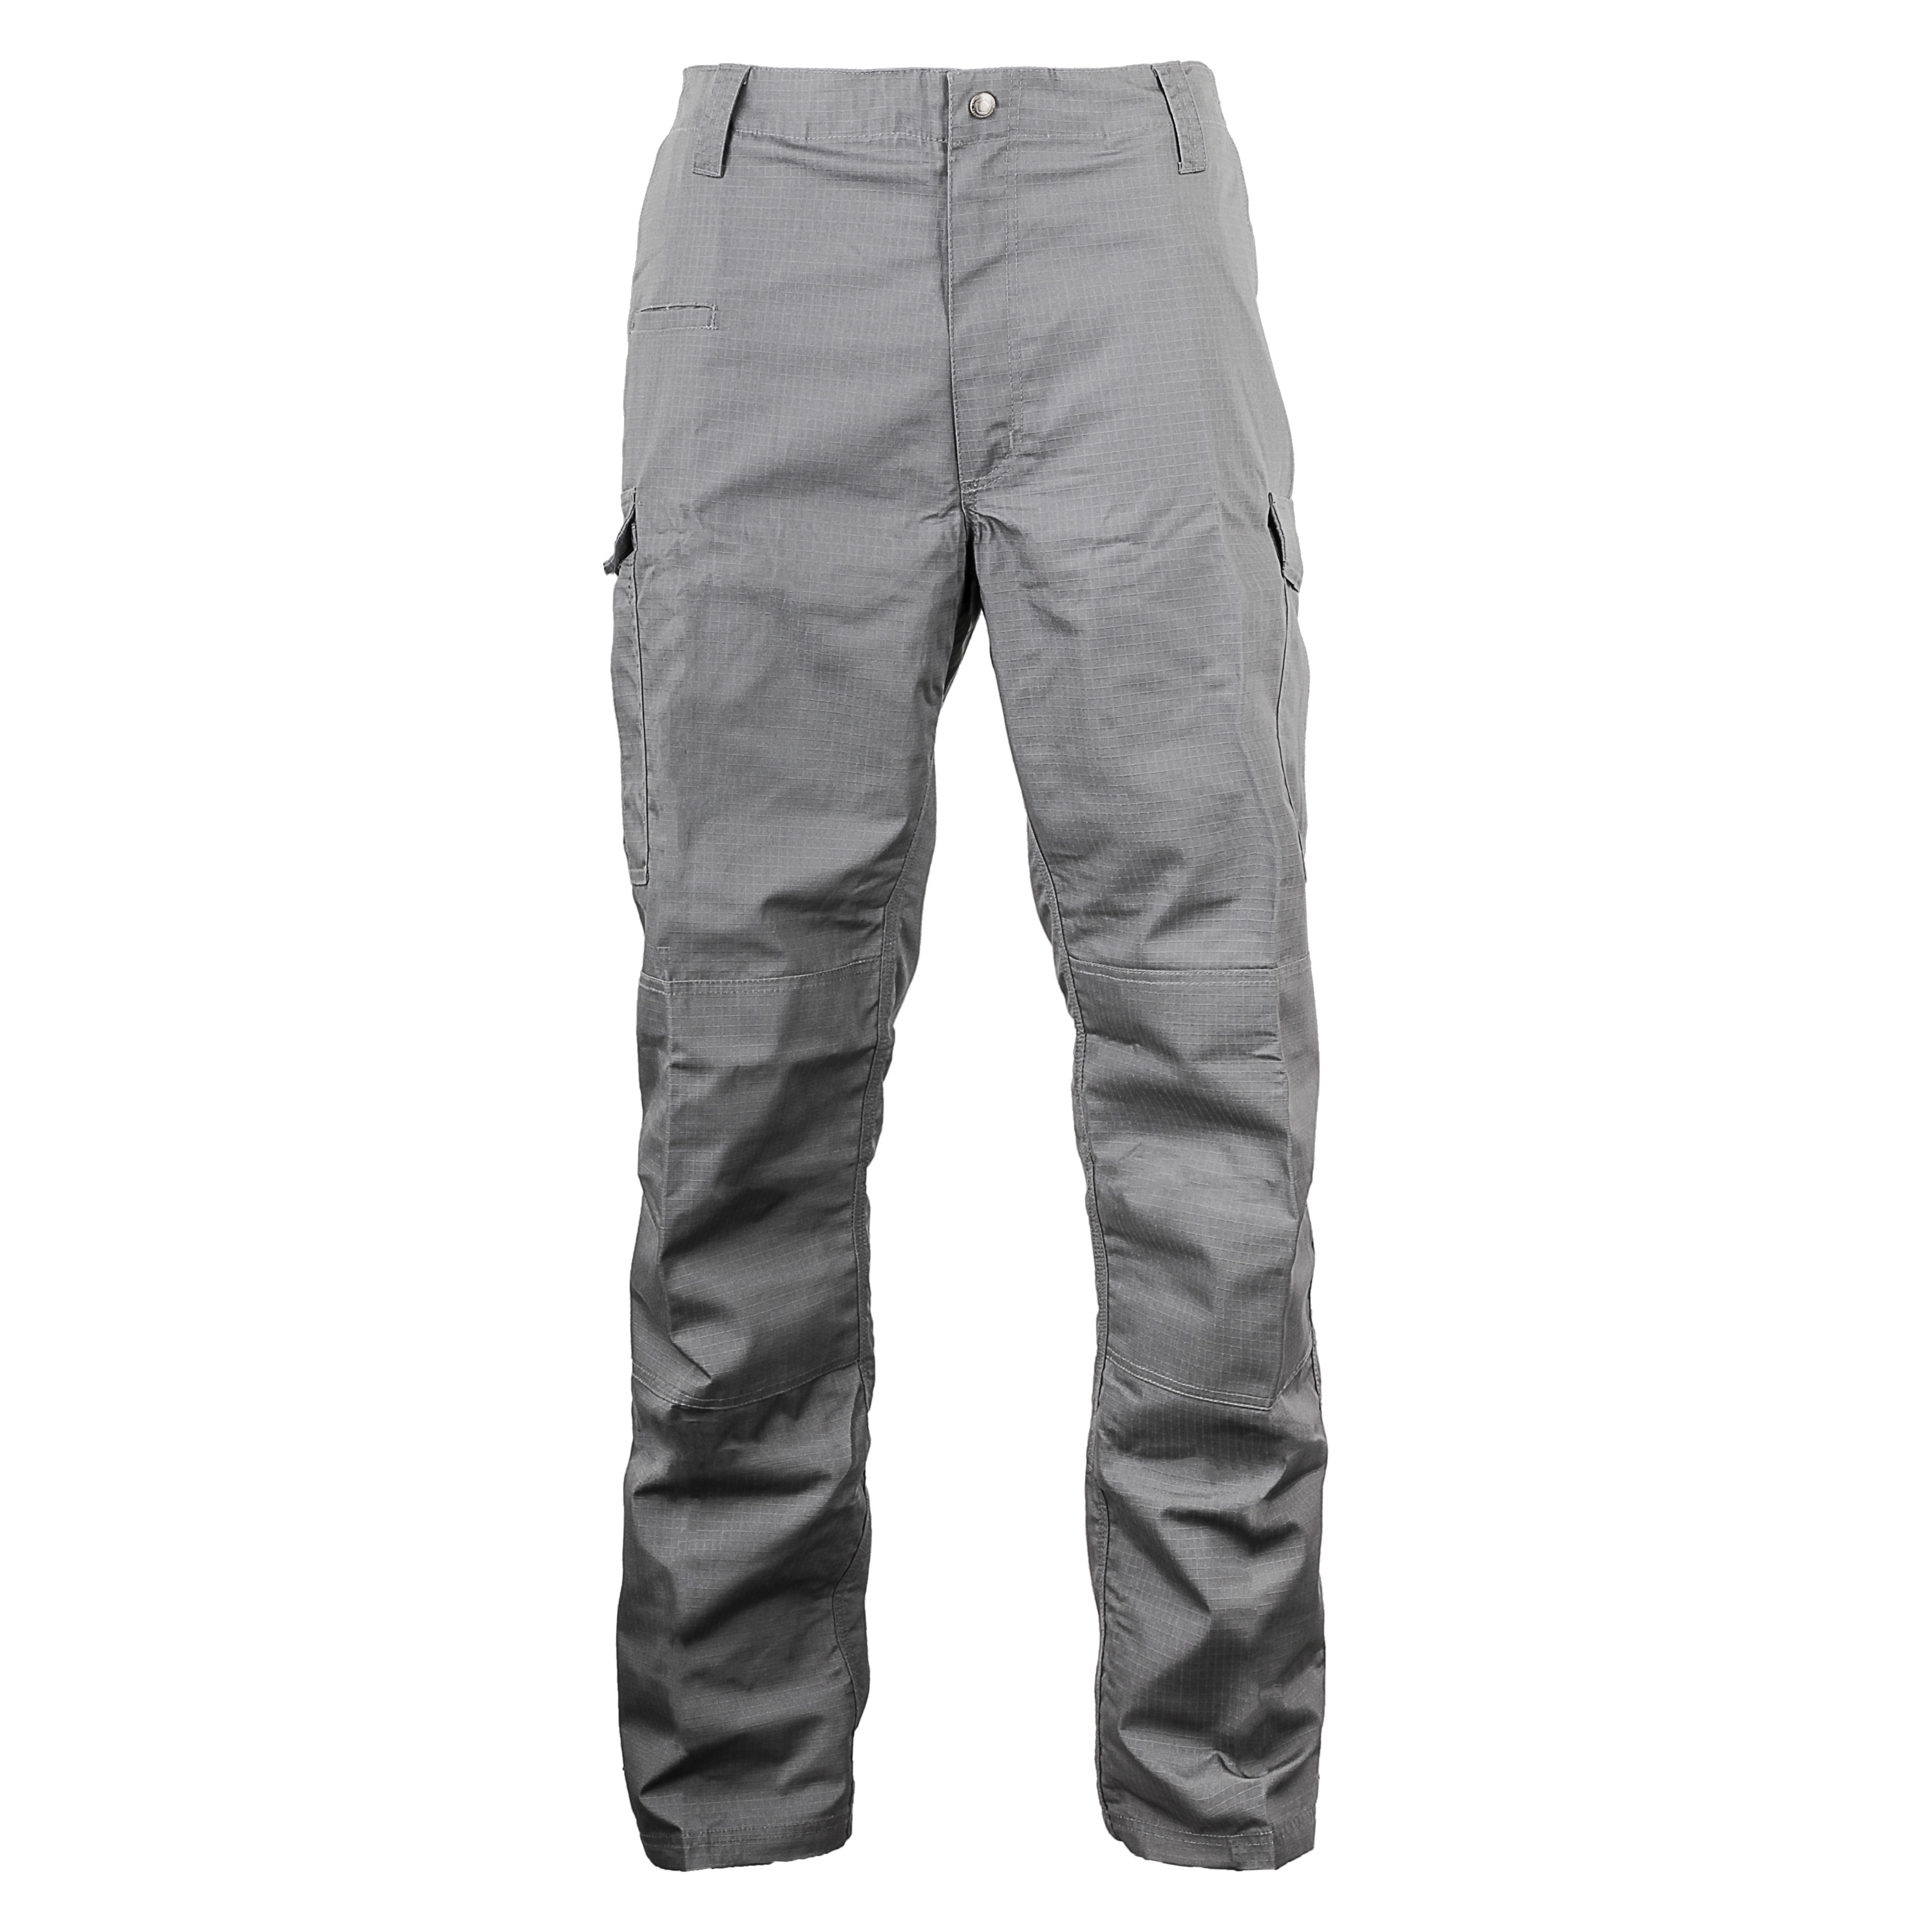 Purchase the Pentagon Pants BDU 2.0 wolf gray by ASMC